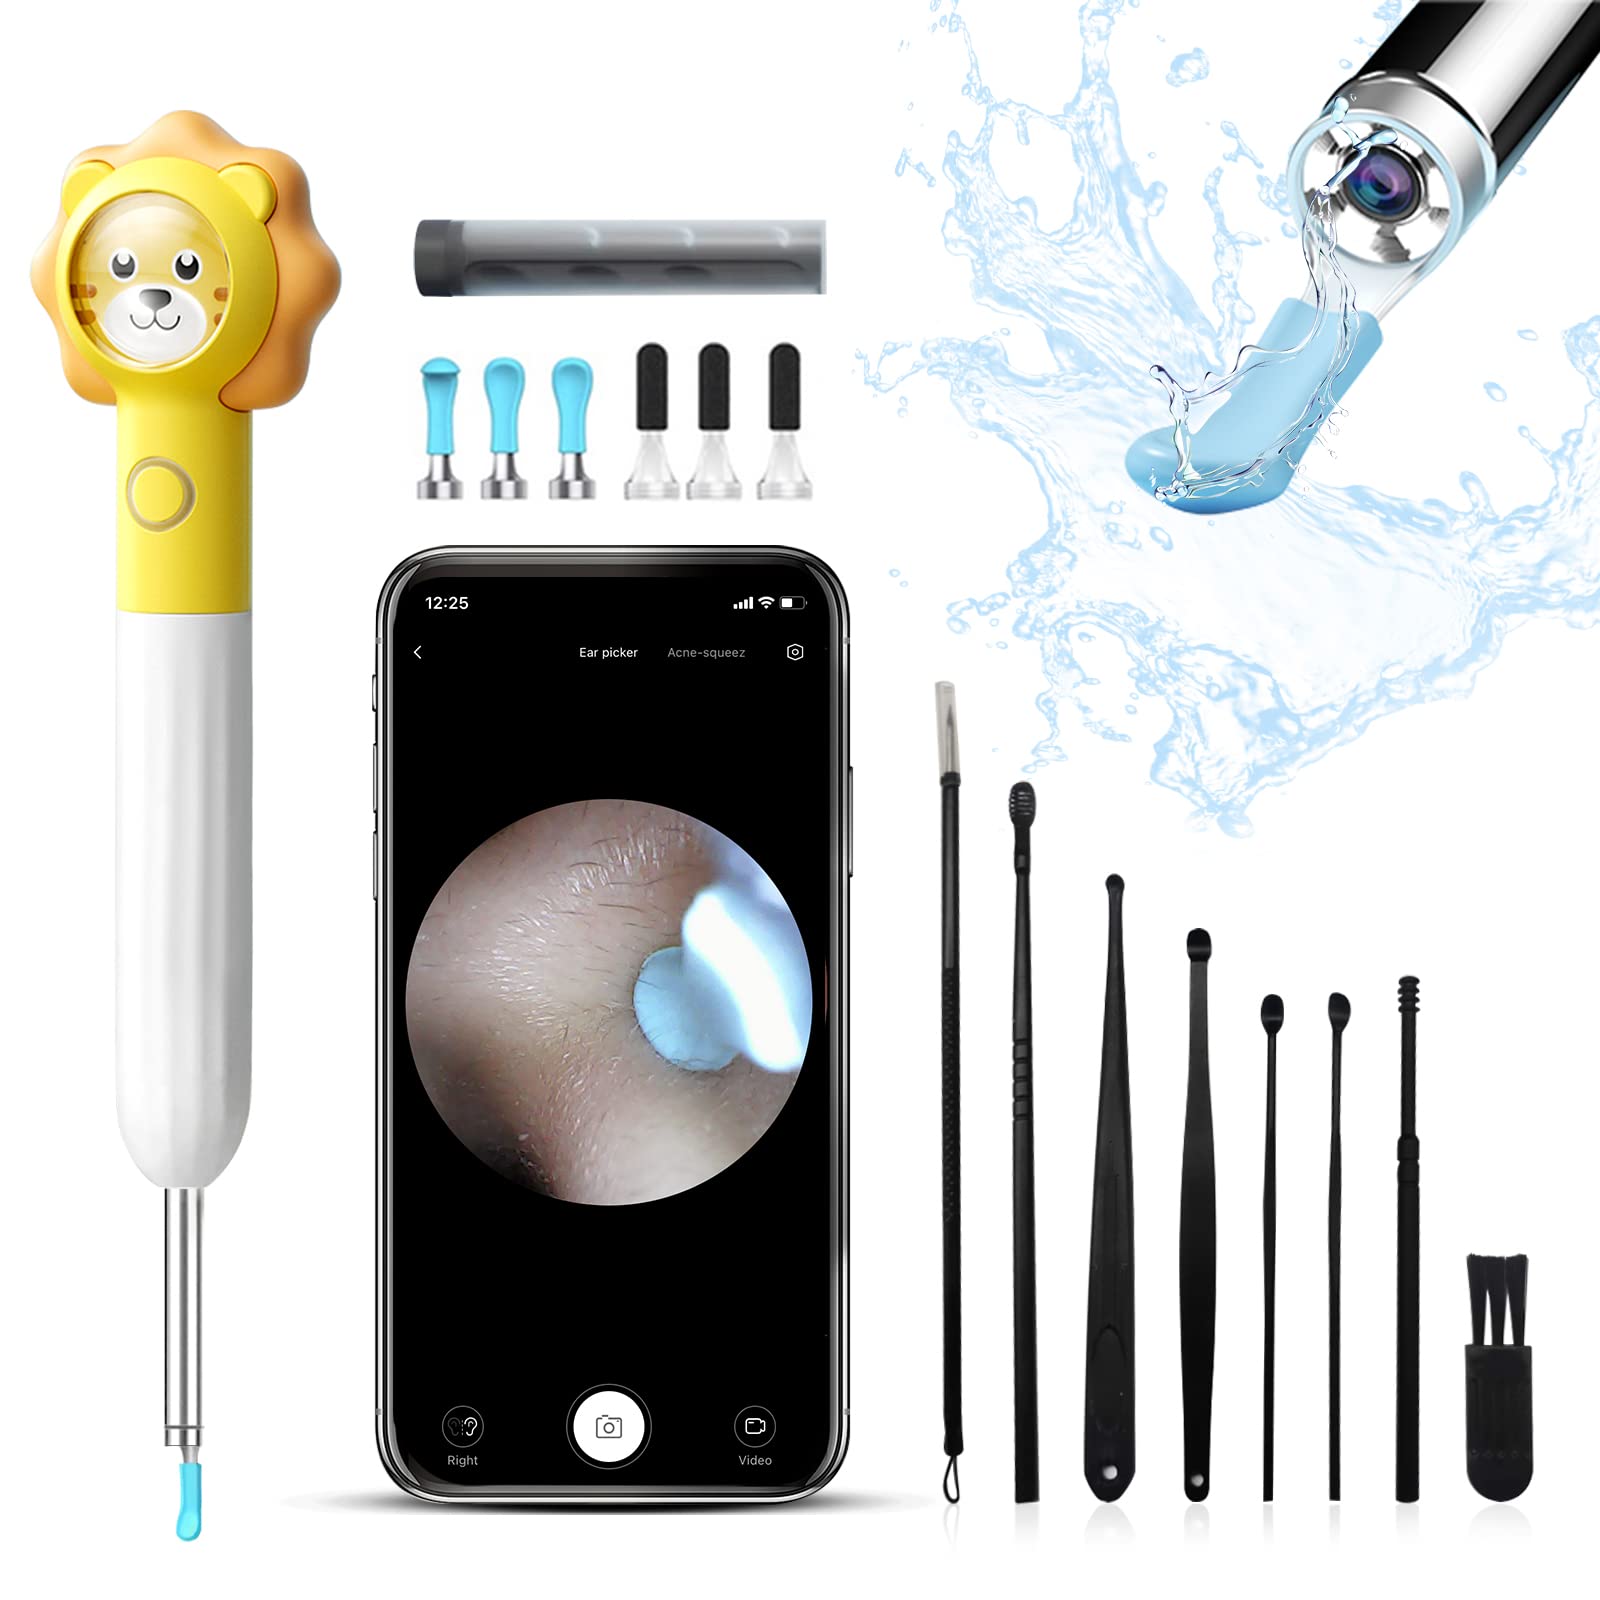 Ear Wax Removal Tool, Smart Ear Cleaner, Ear Camera Scope with Light  Smartphone Ear HD Video Otoscope Wax Cleaner Works with Apple iOS iPhone